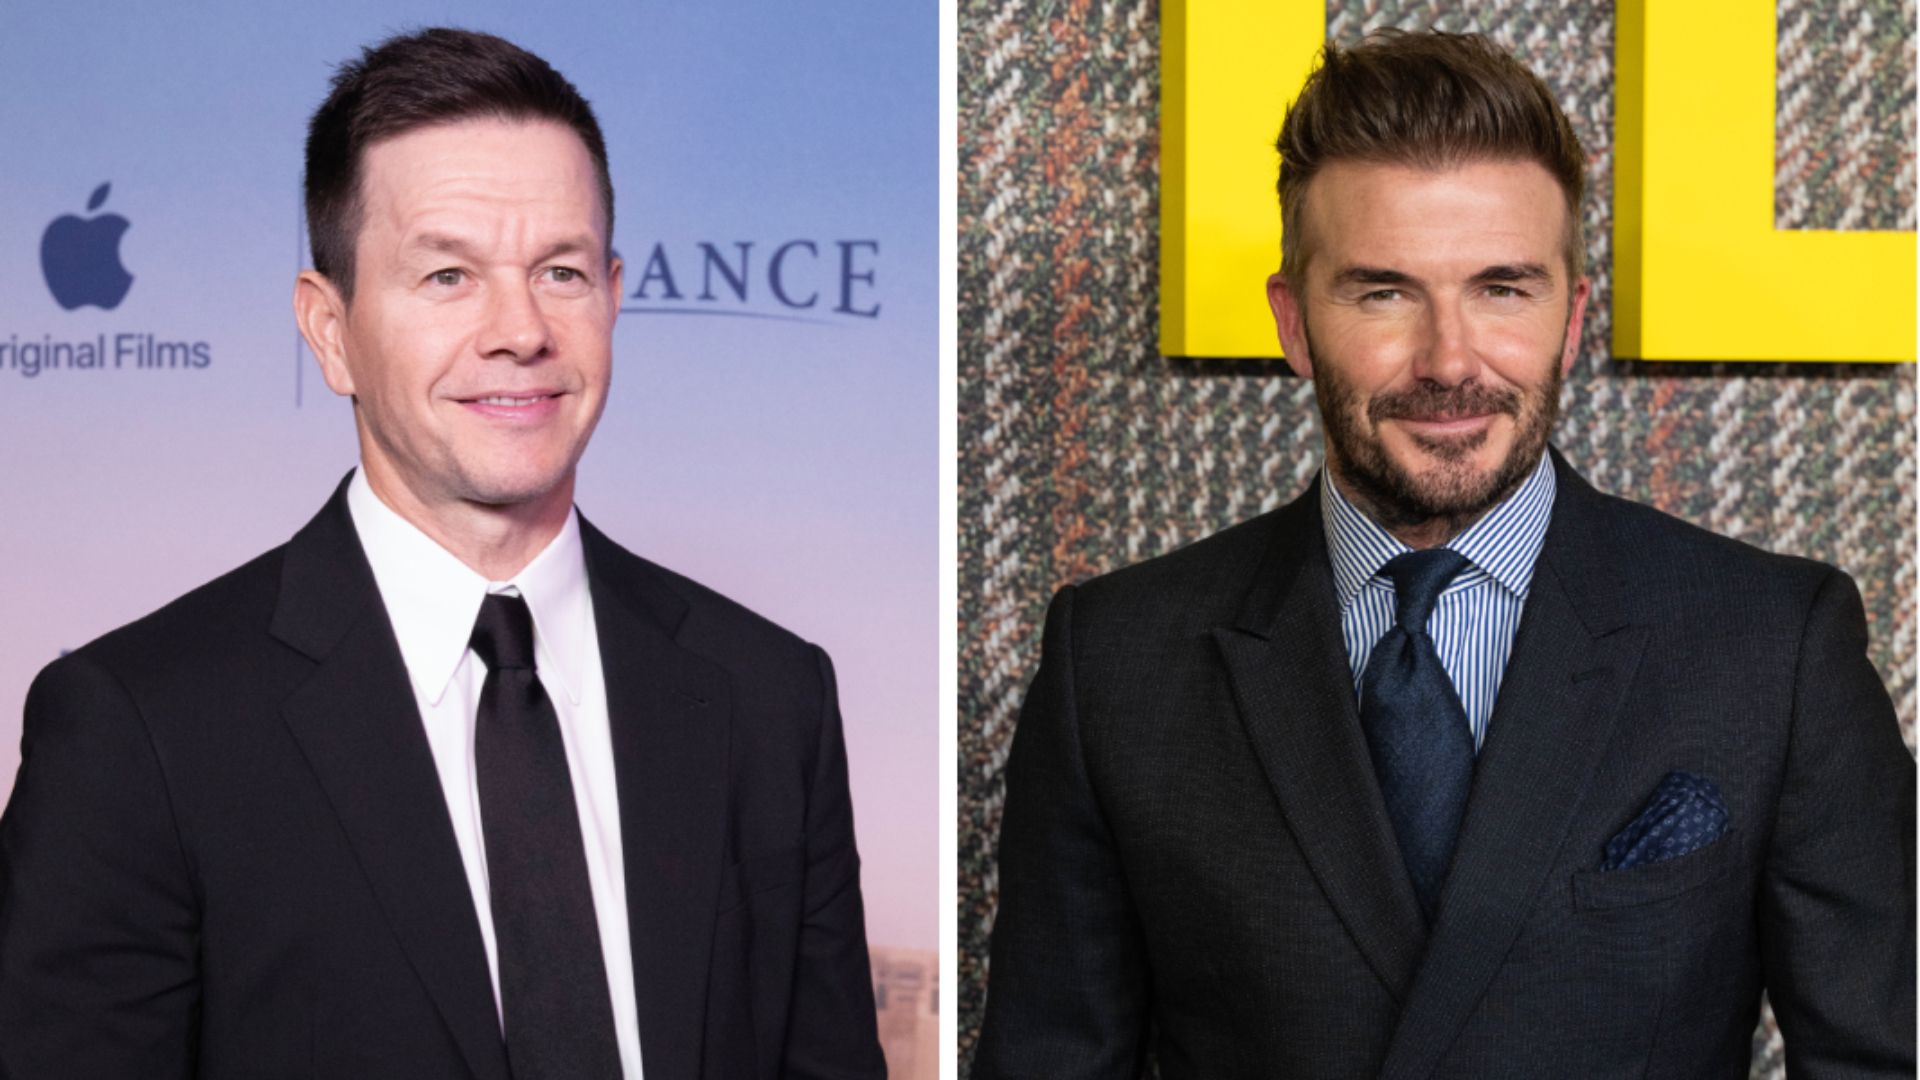 Why is David Beckham suing Mark Wahlberg for millions? All about his business once worth $1B